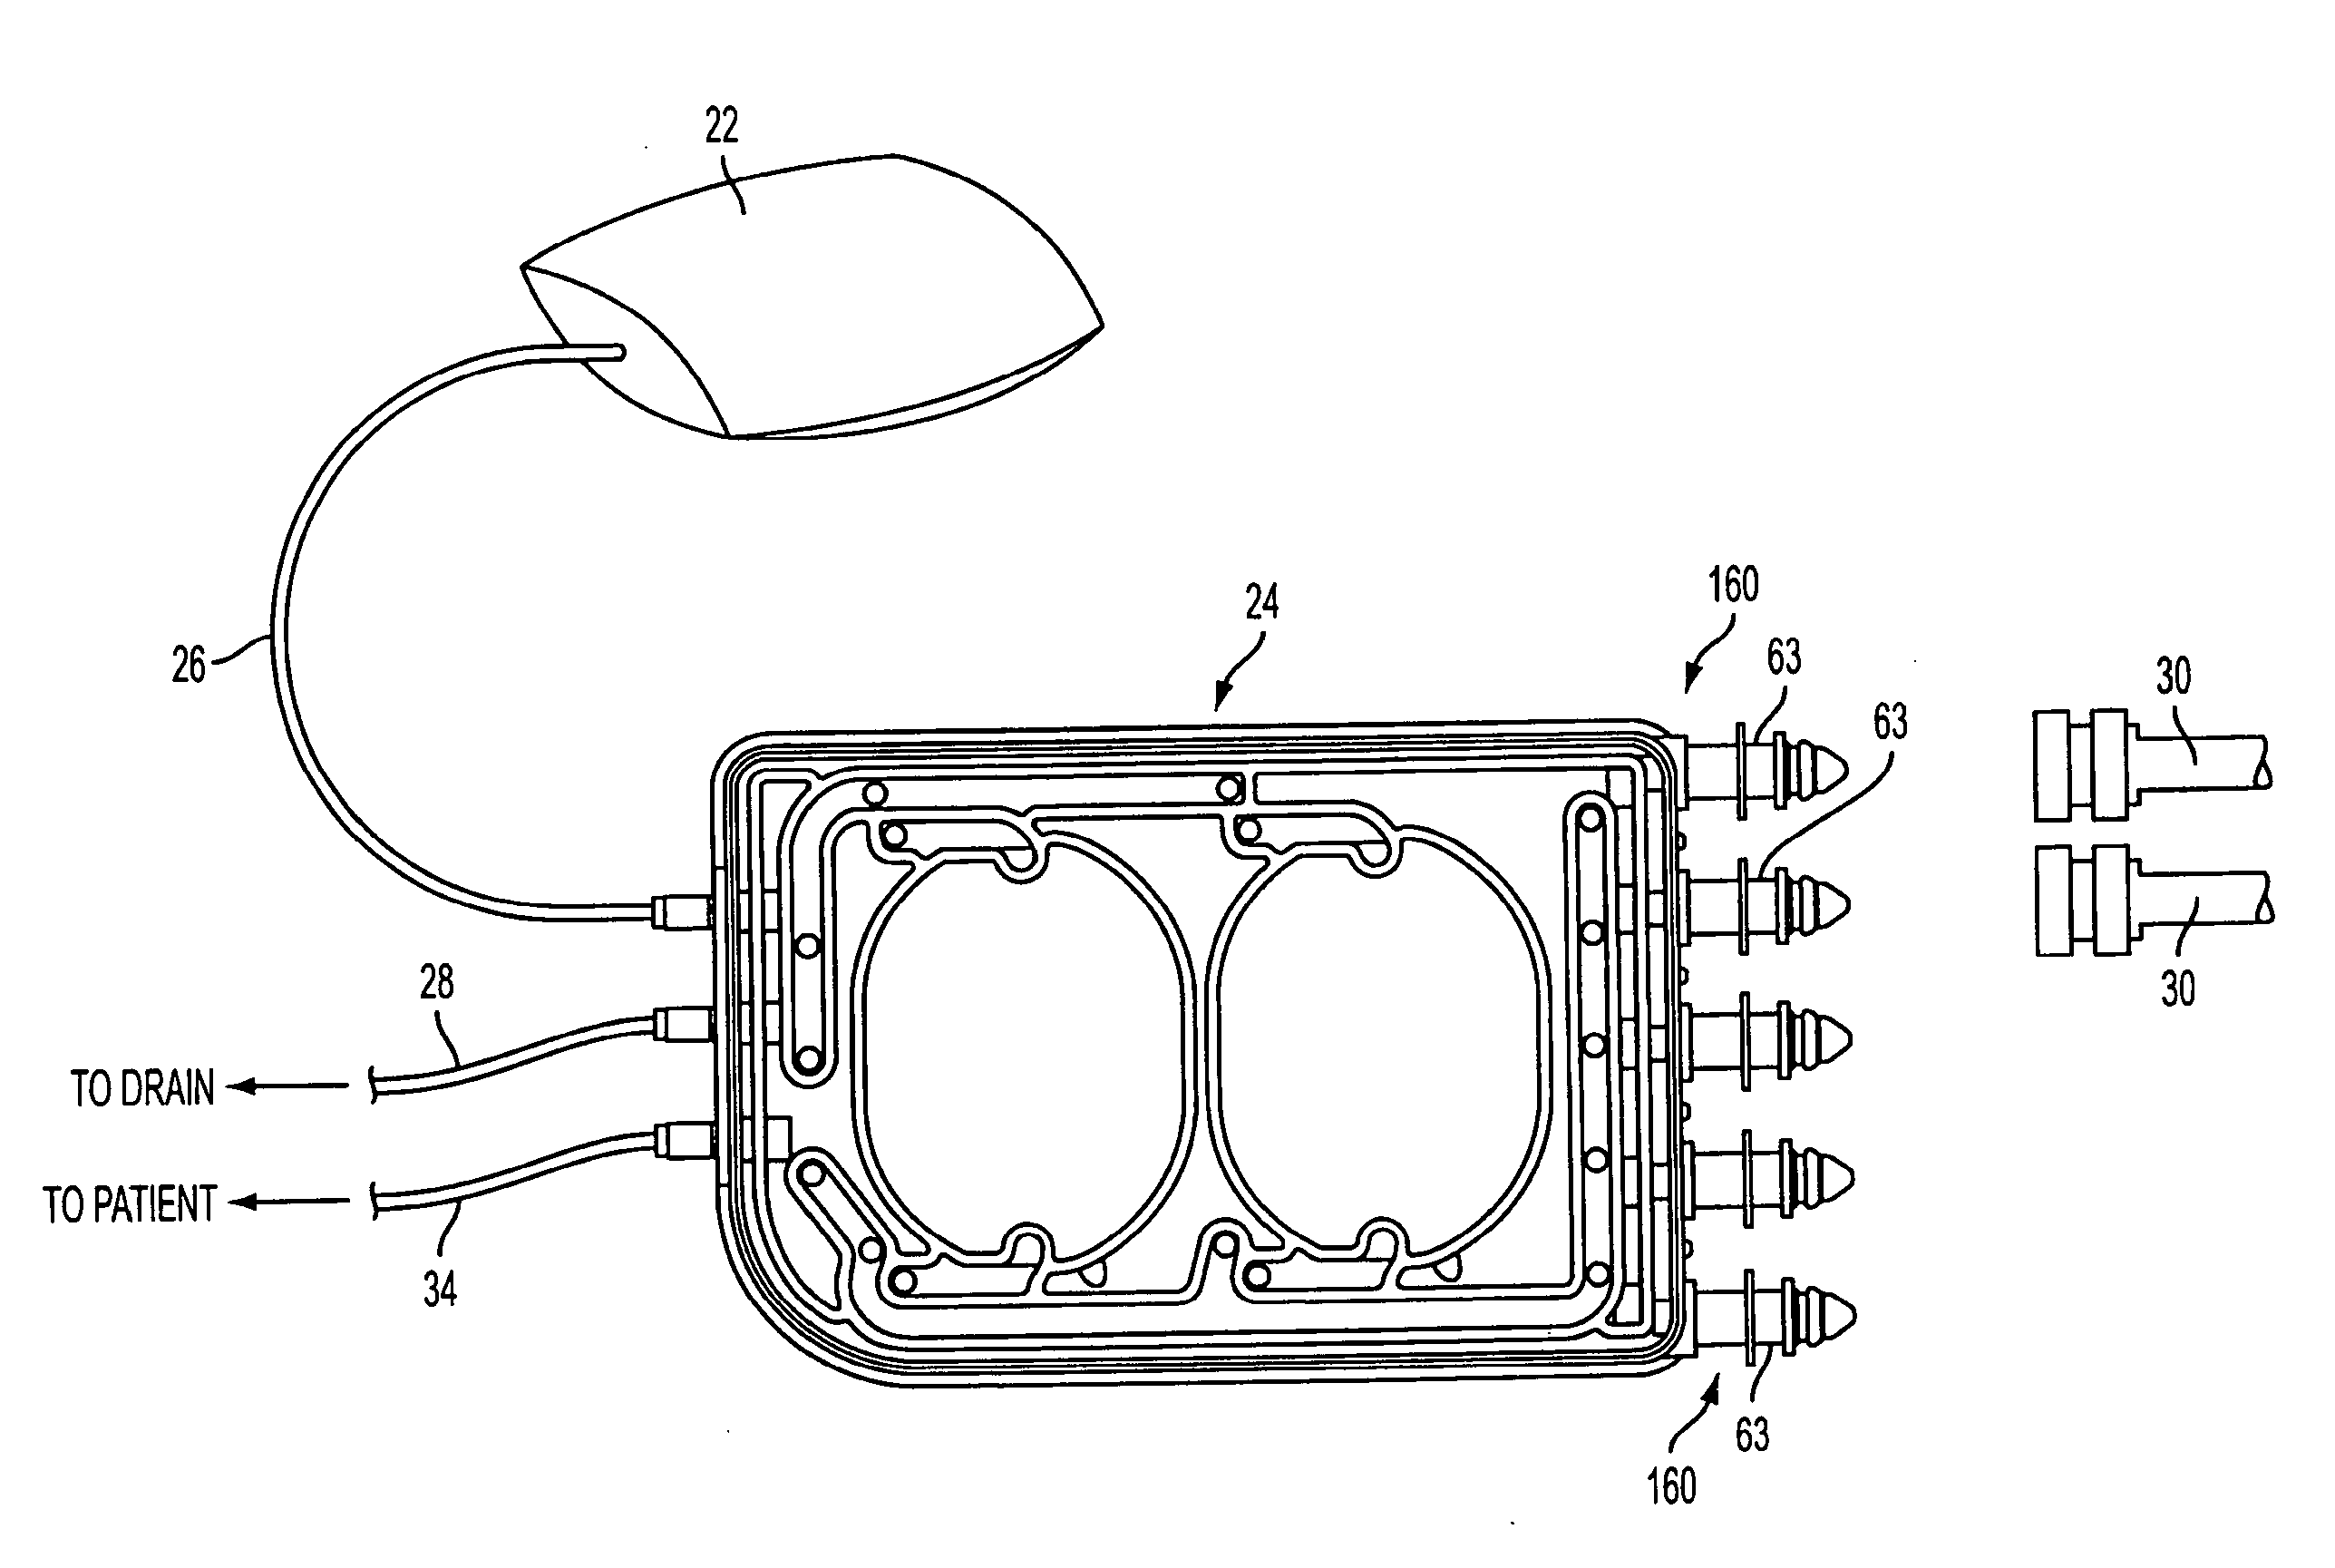 Pump cassette and methods for use in medical treatment system using a plurality of fluid lines